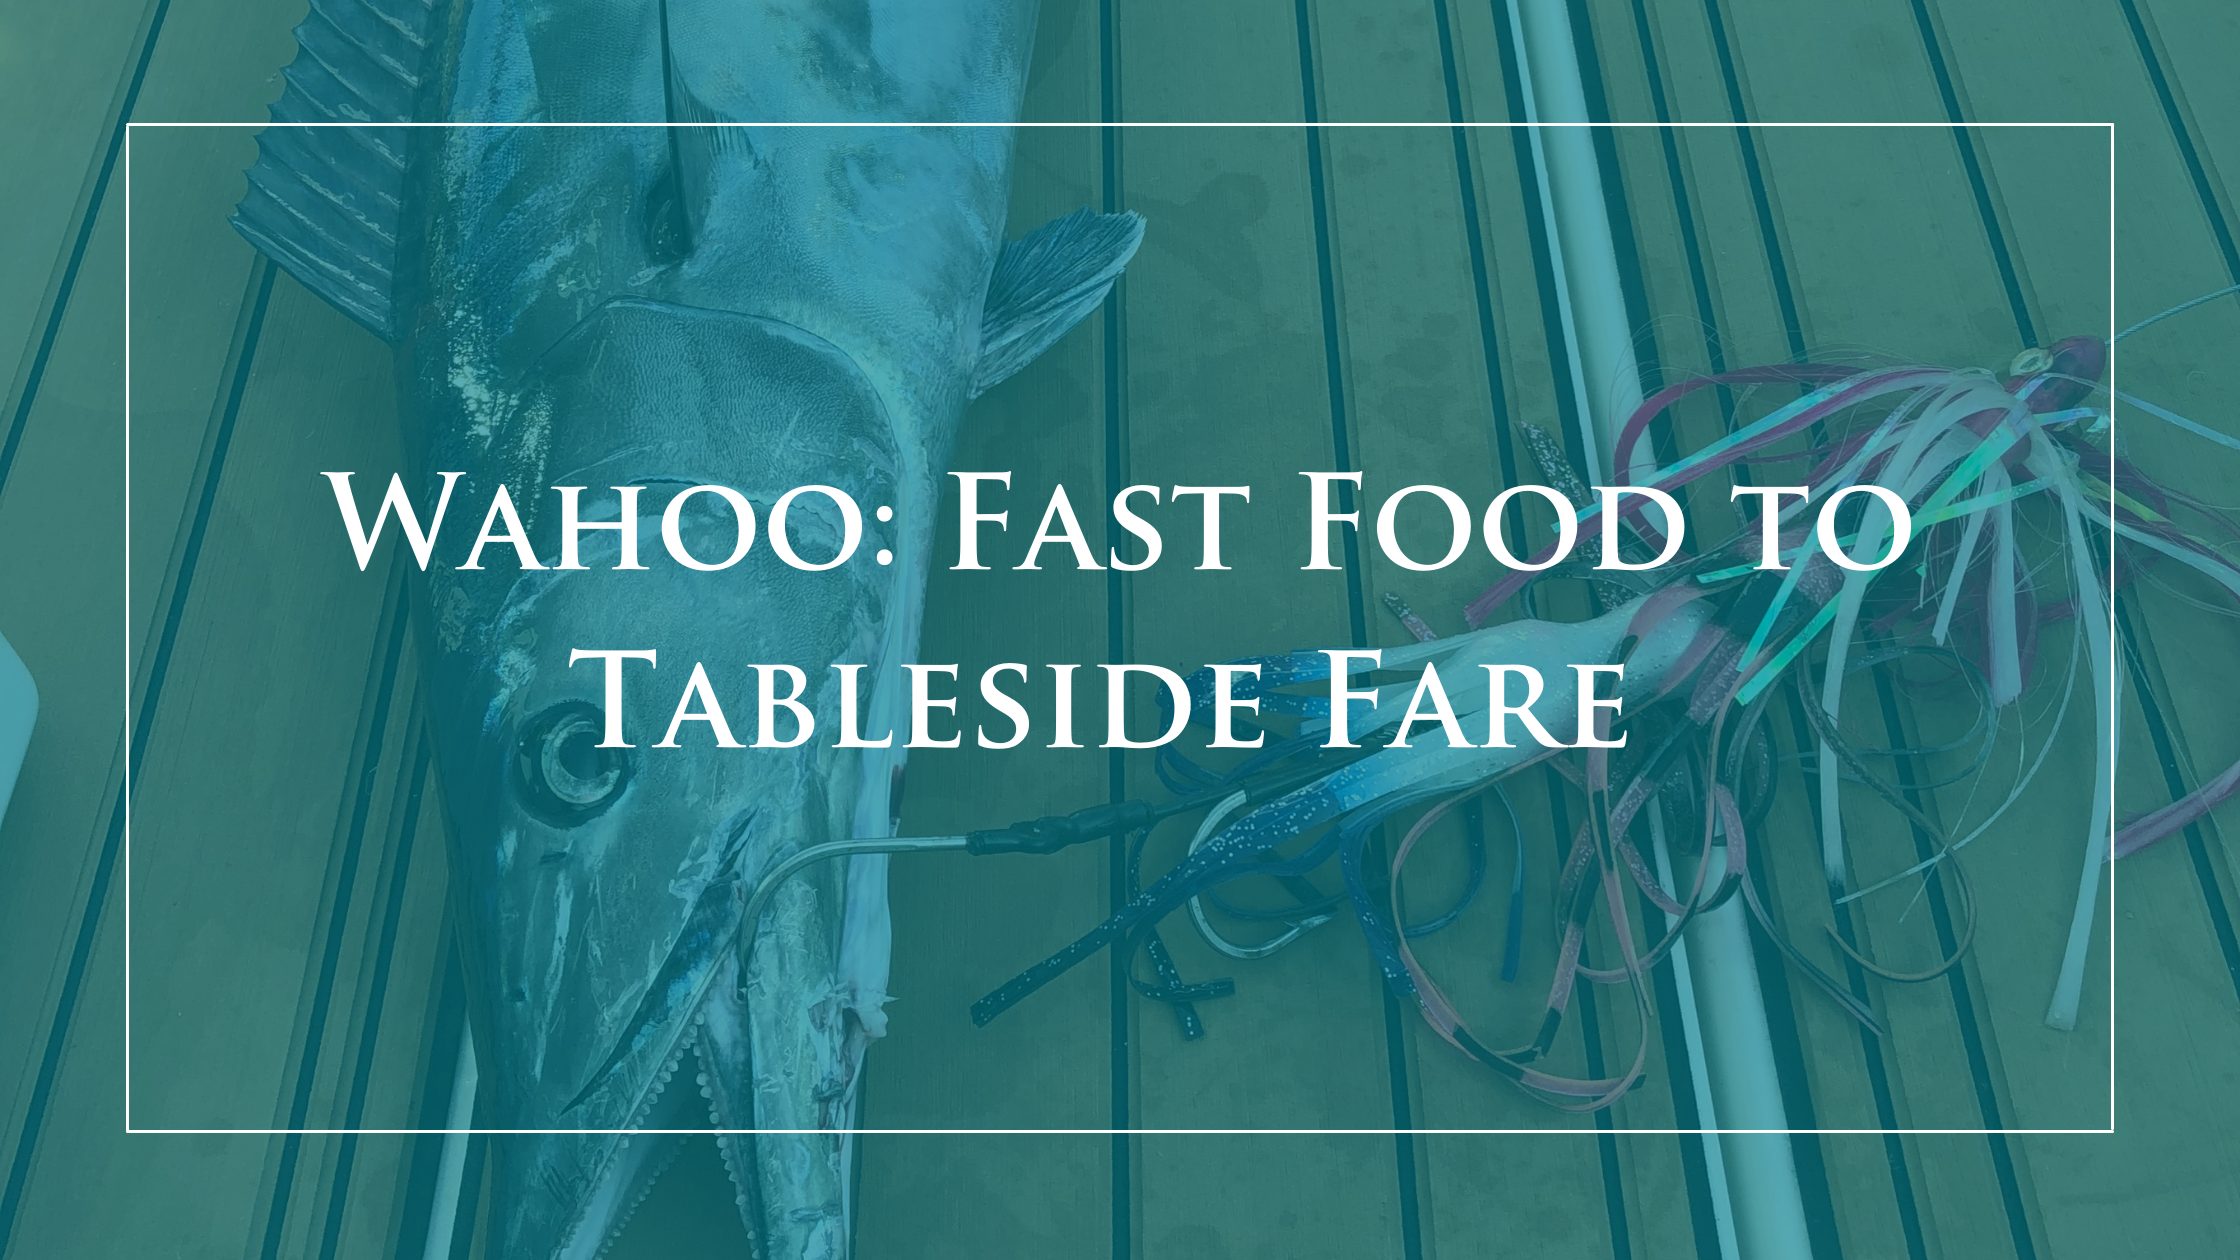 Wahoo: Fast Food to Tableside Fare